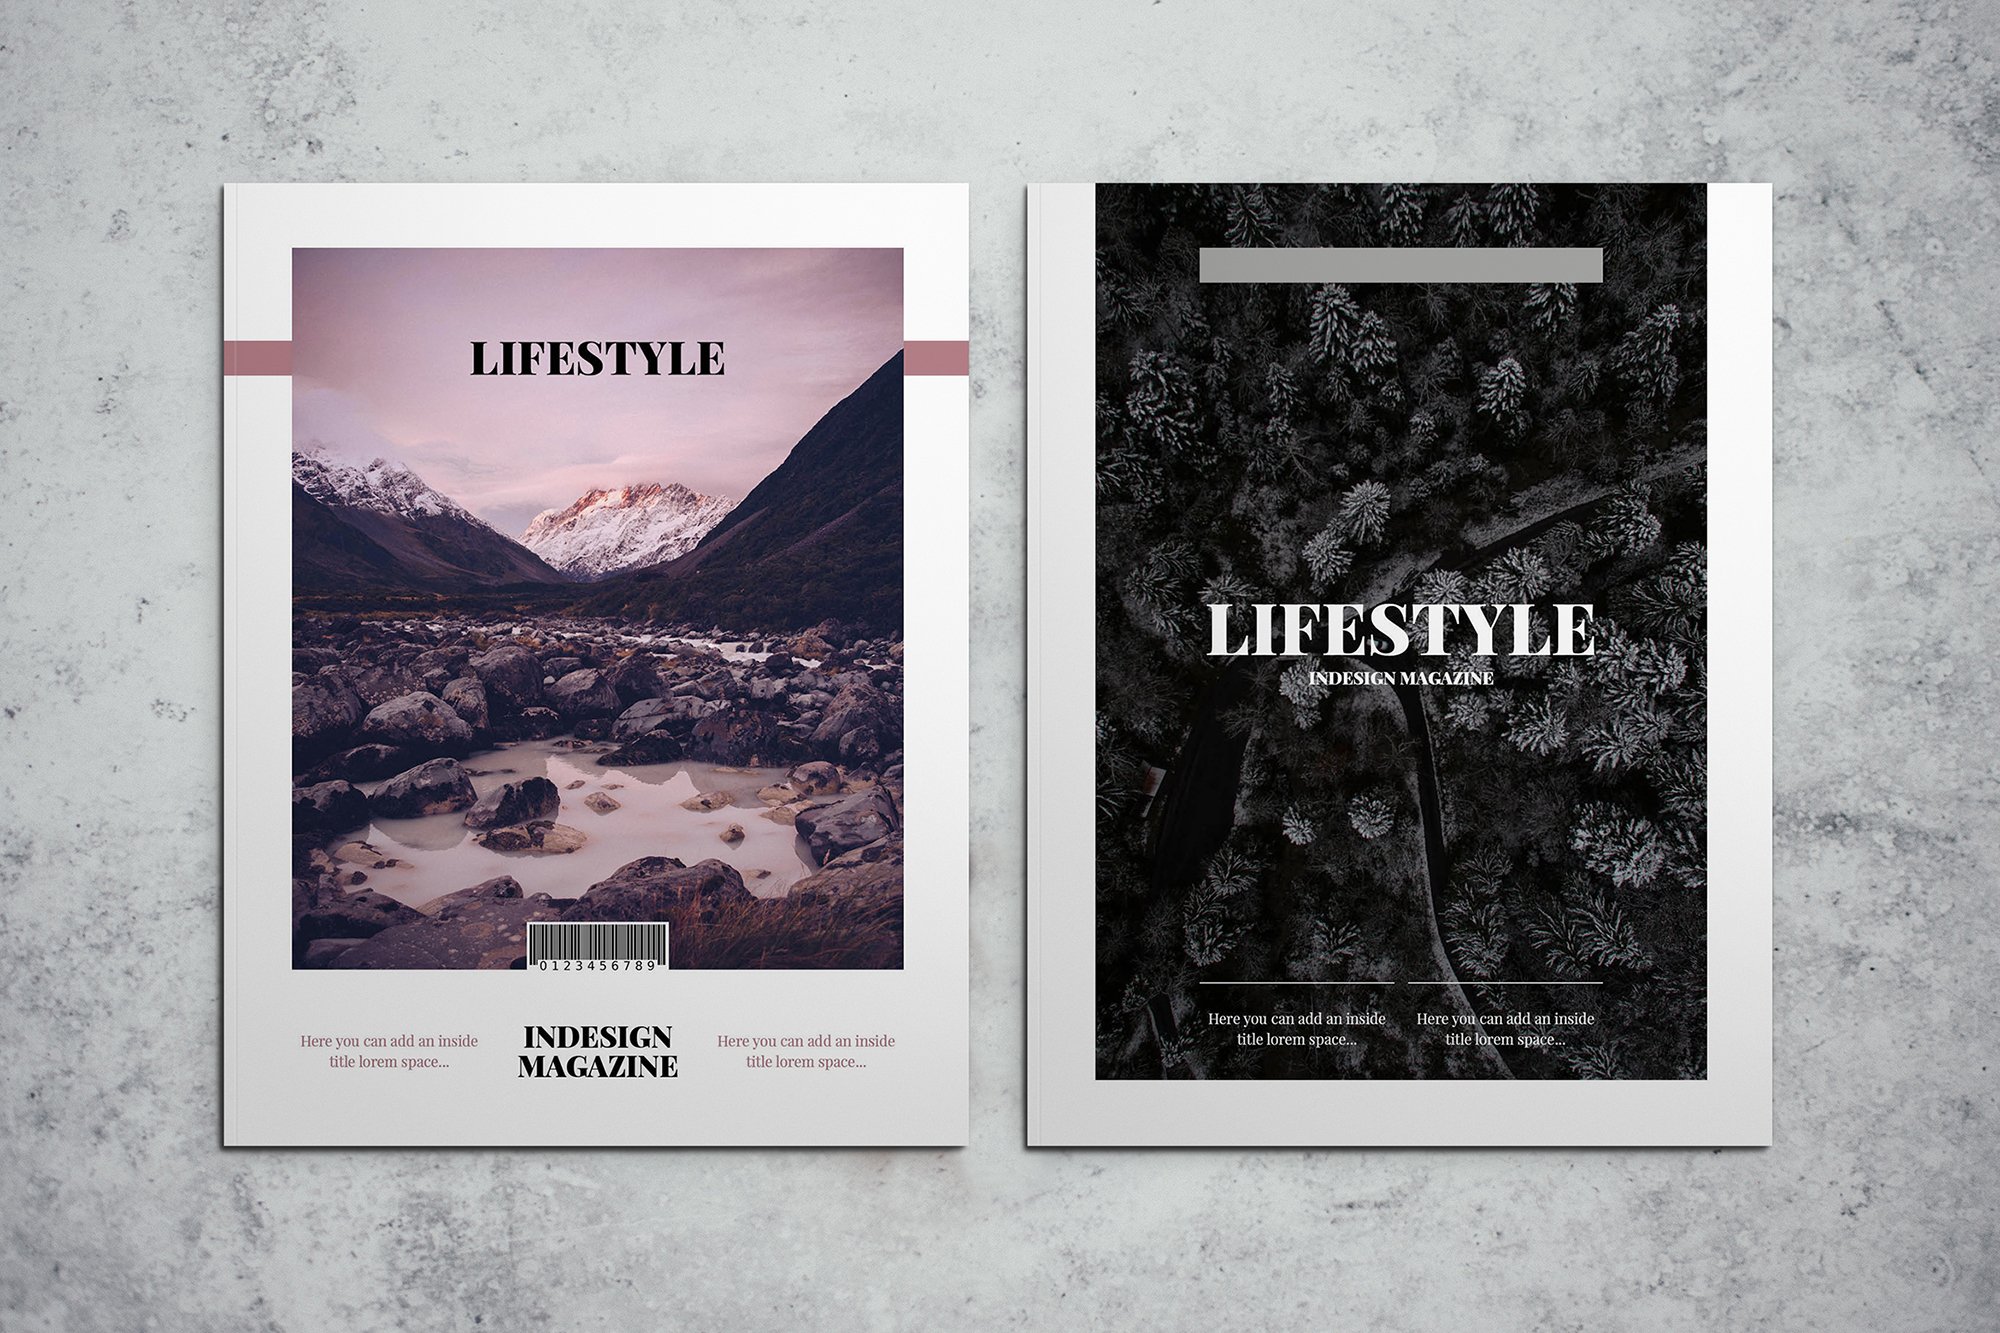 Lifestyle Magazine Indesign Template cover image.